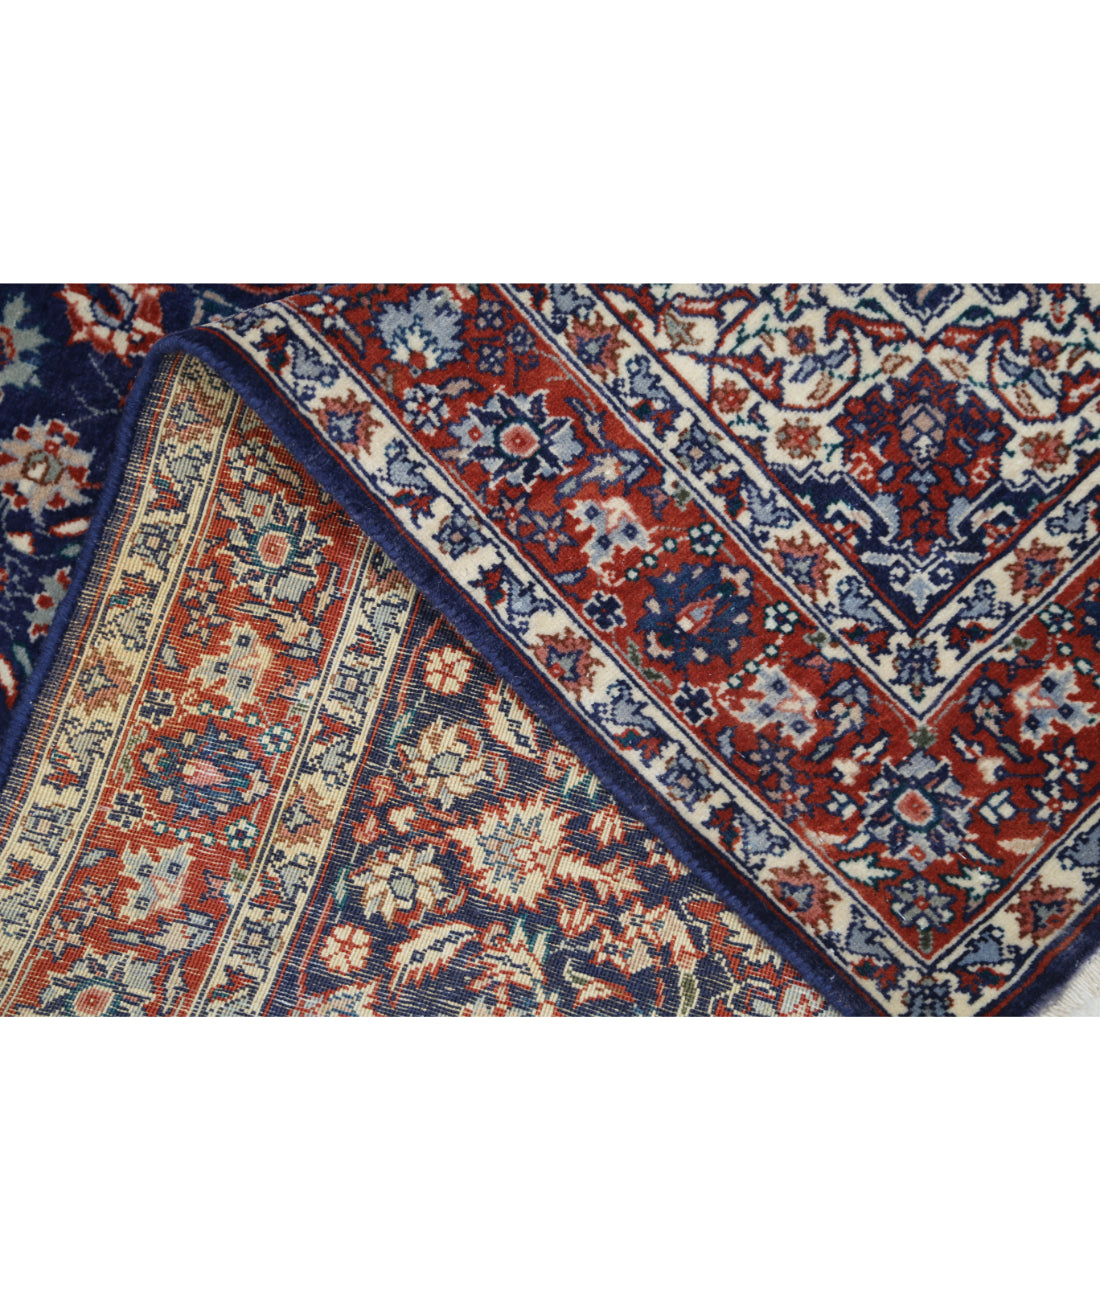 Hand Knotted Heritage Fine Persian Style Wool Rug - 2'8'' x 13'4'' 2' 8" X 13' 4" (81 X 406) / Blue / Rust